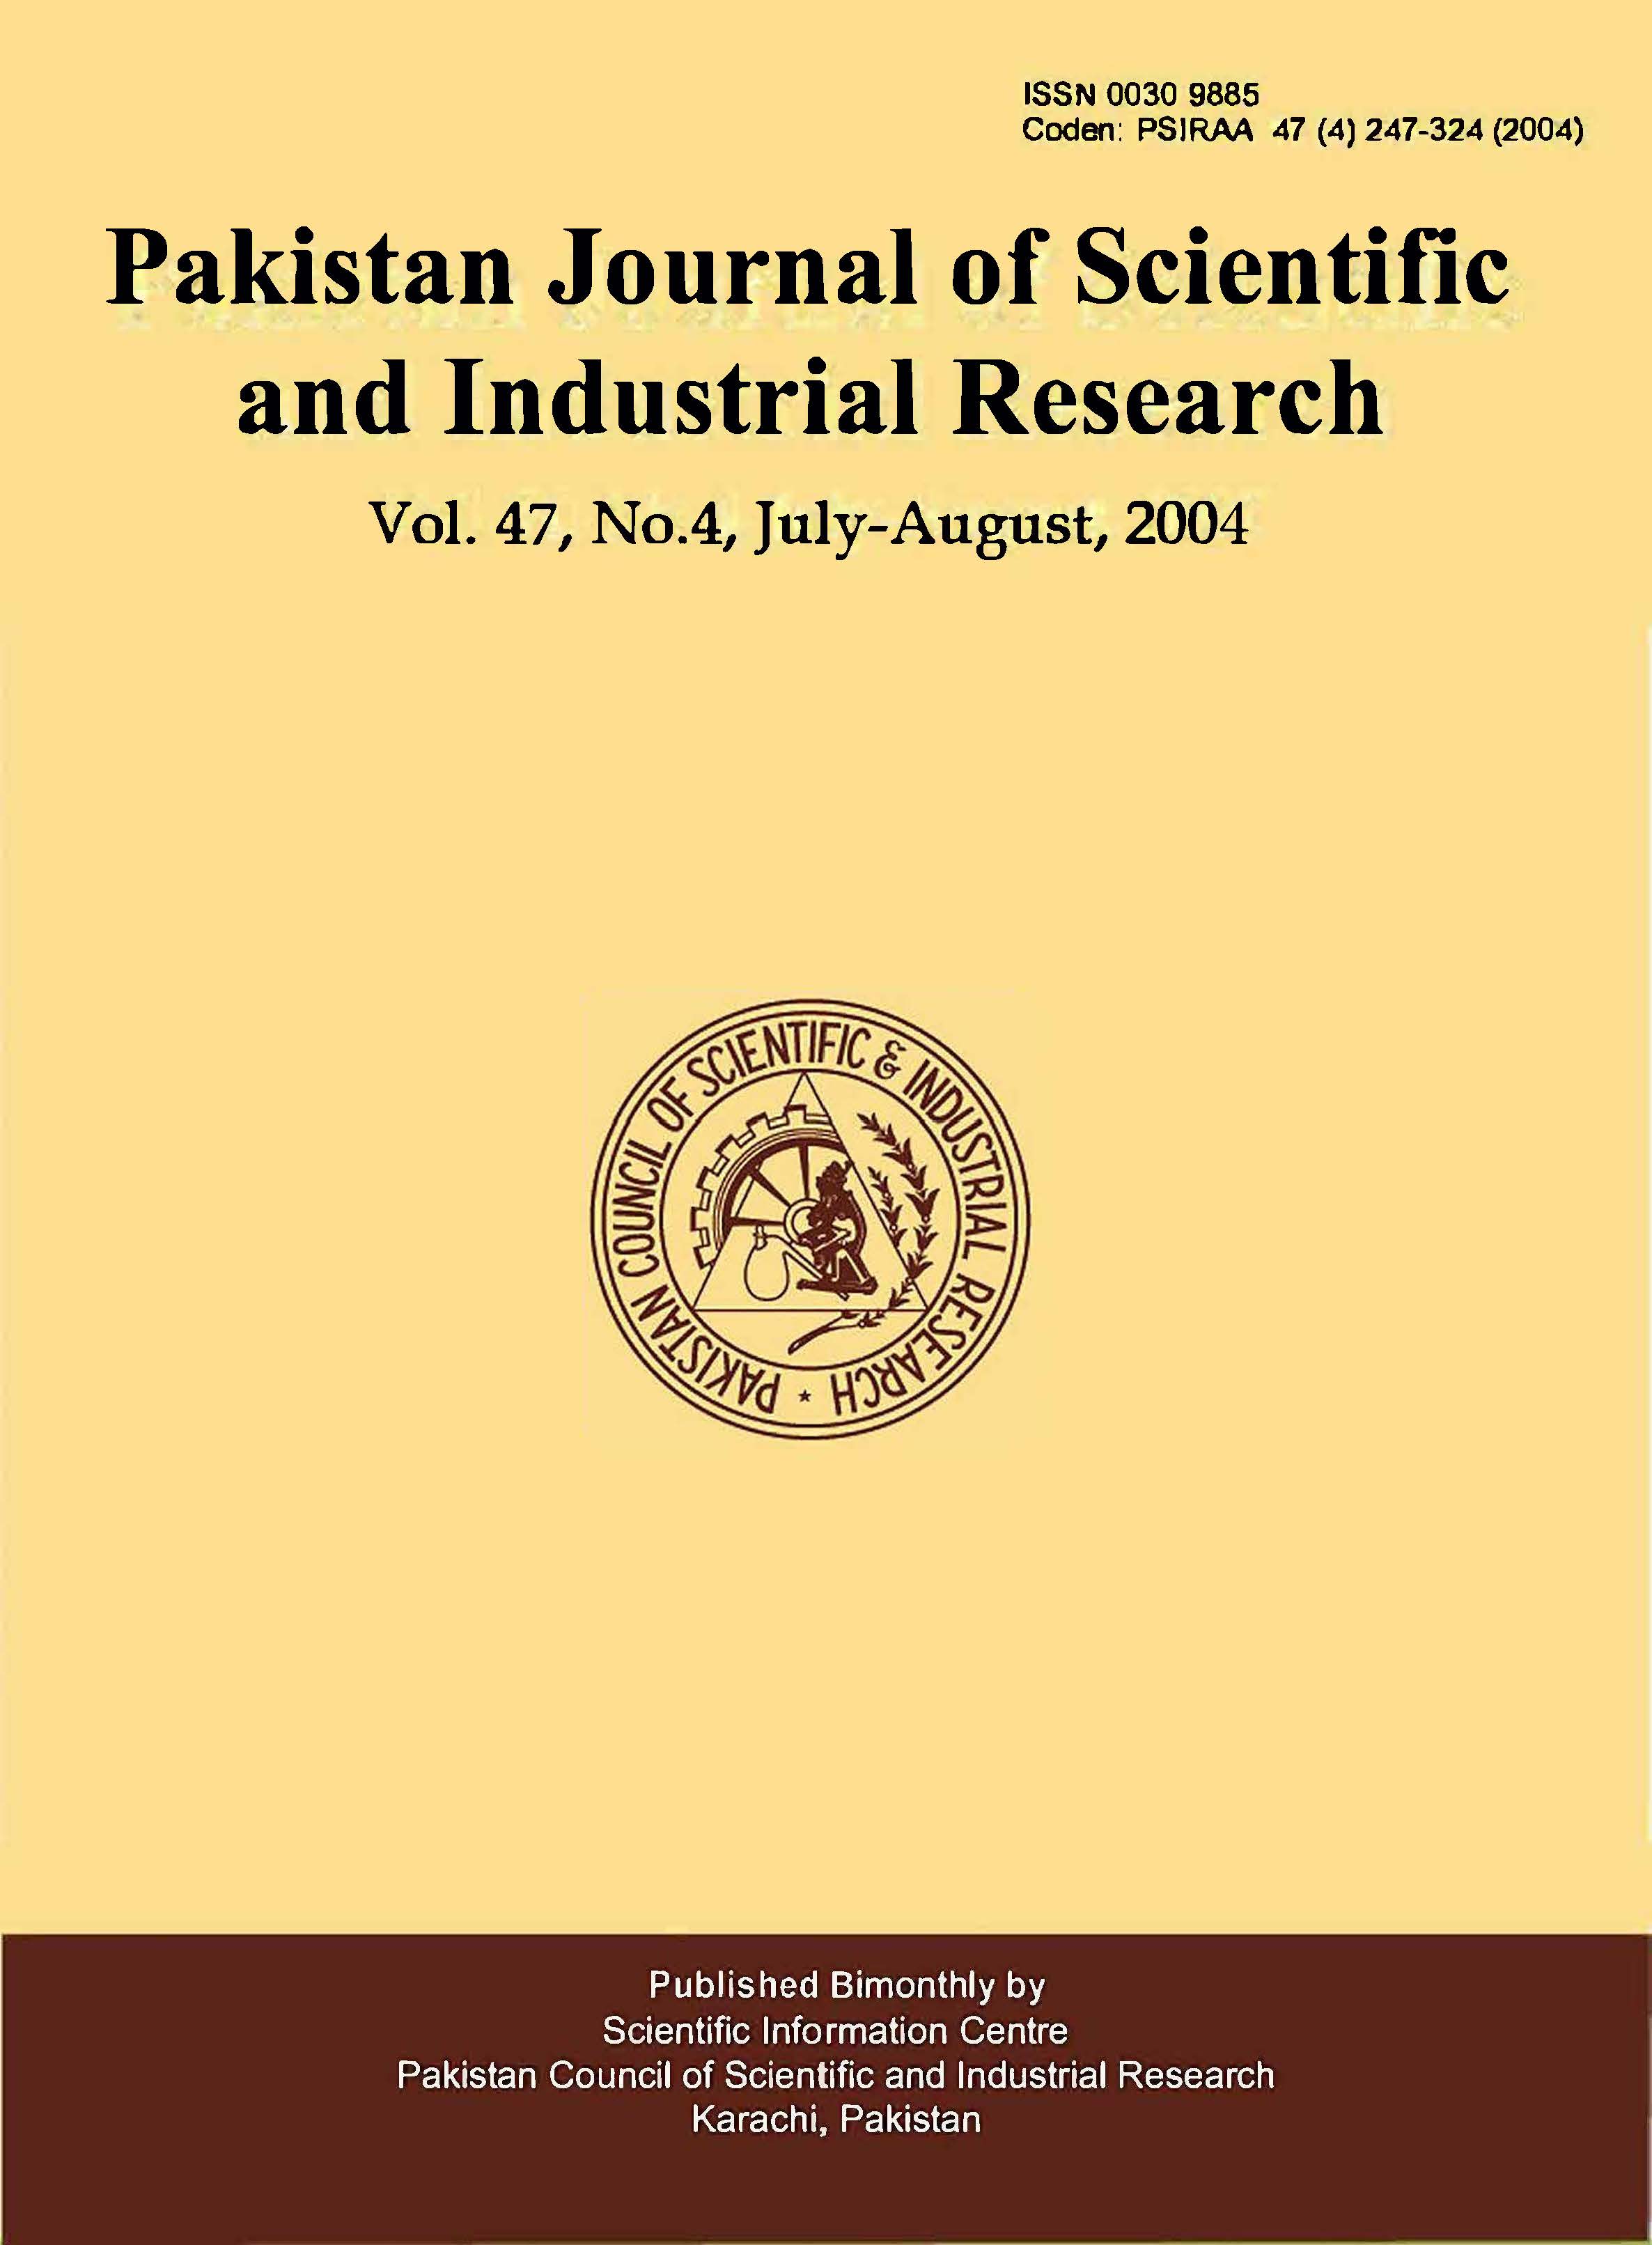 					View Vol. 47 No. 4 (2004): Pakistan Journal of Scientific and Industrial Research
				